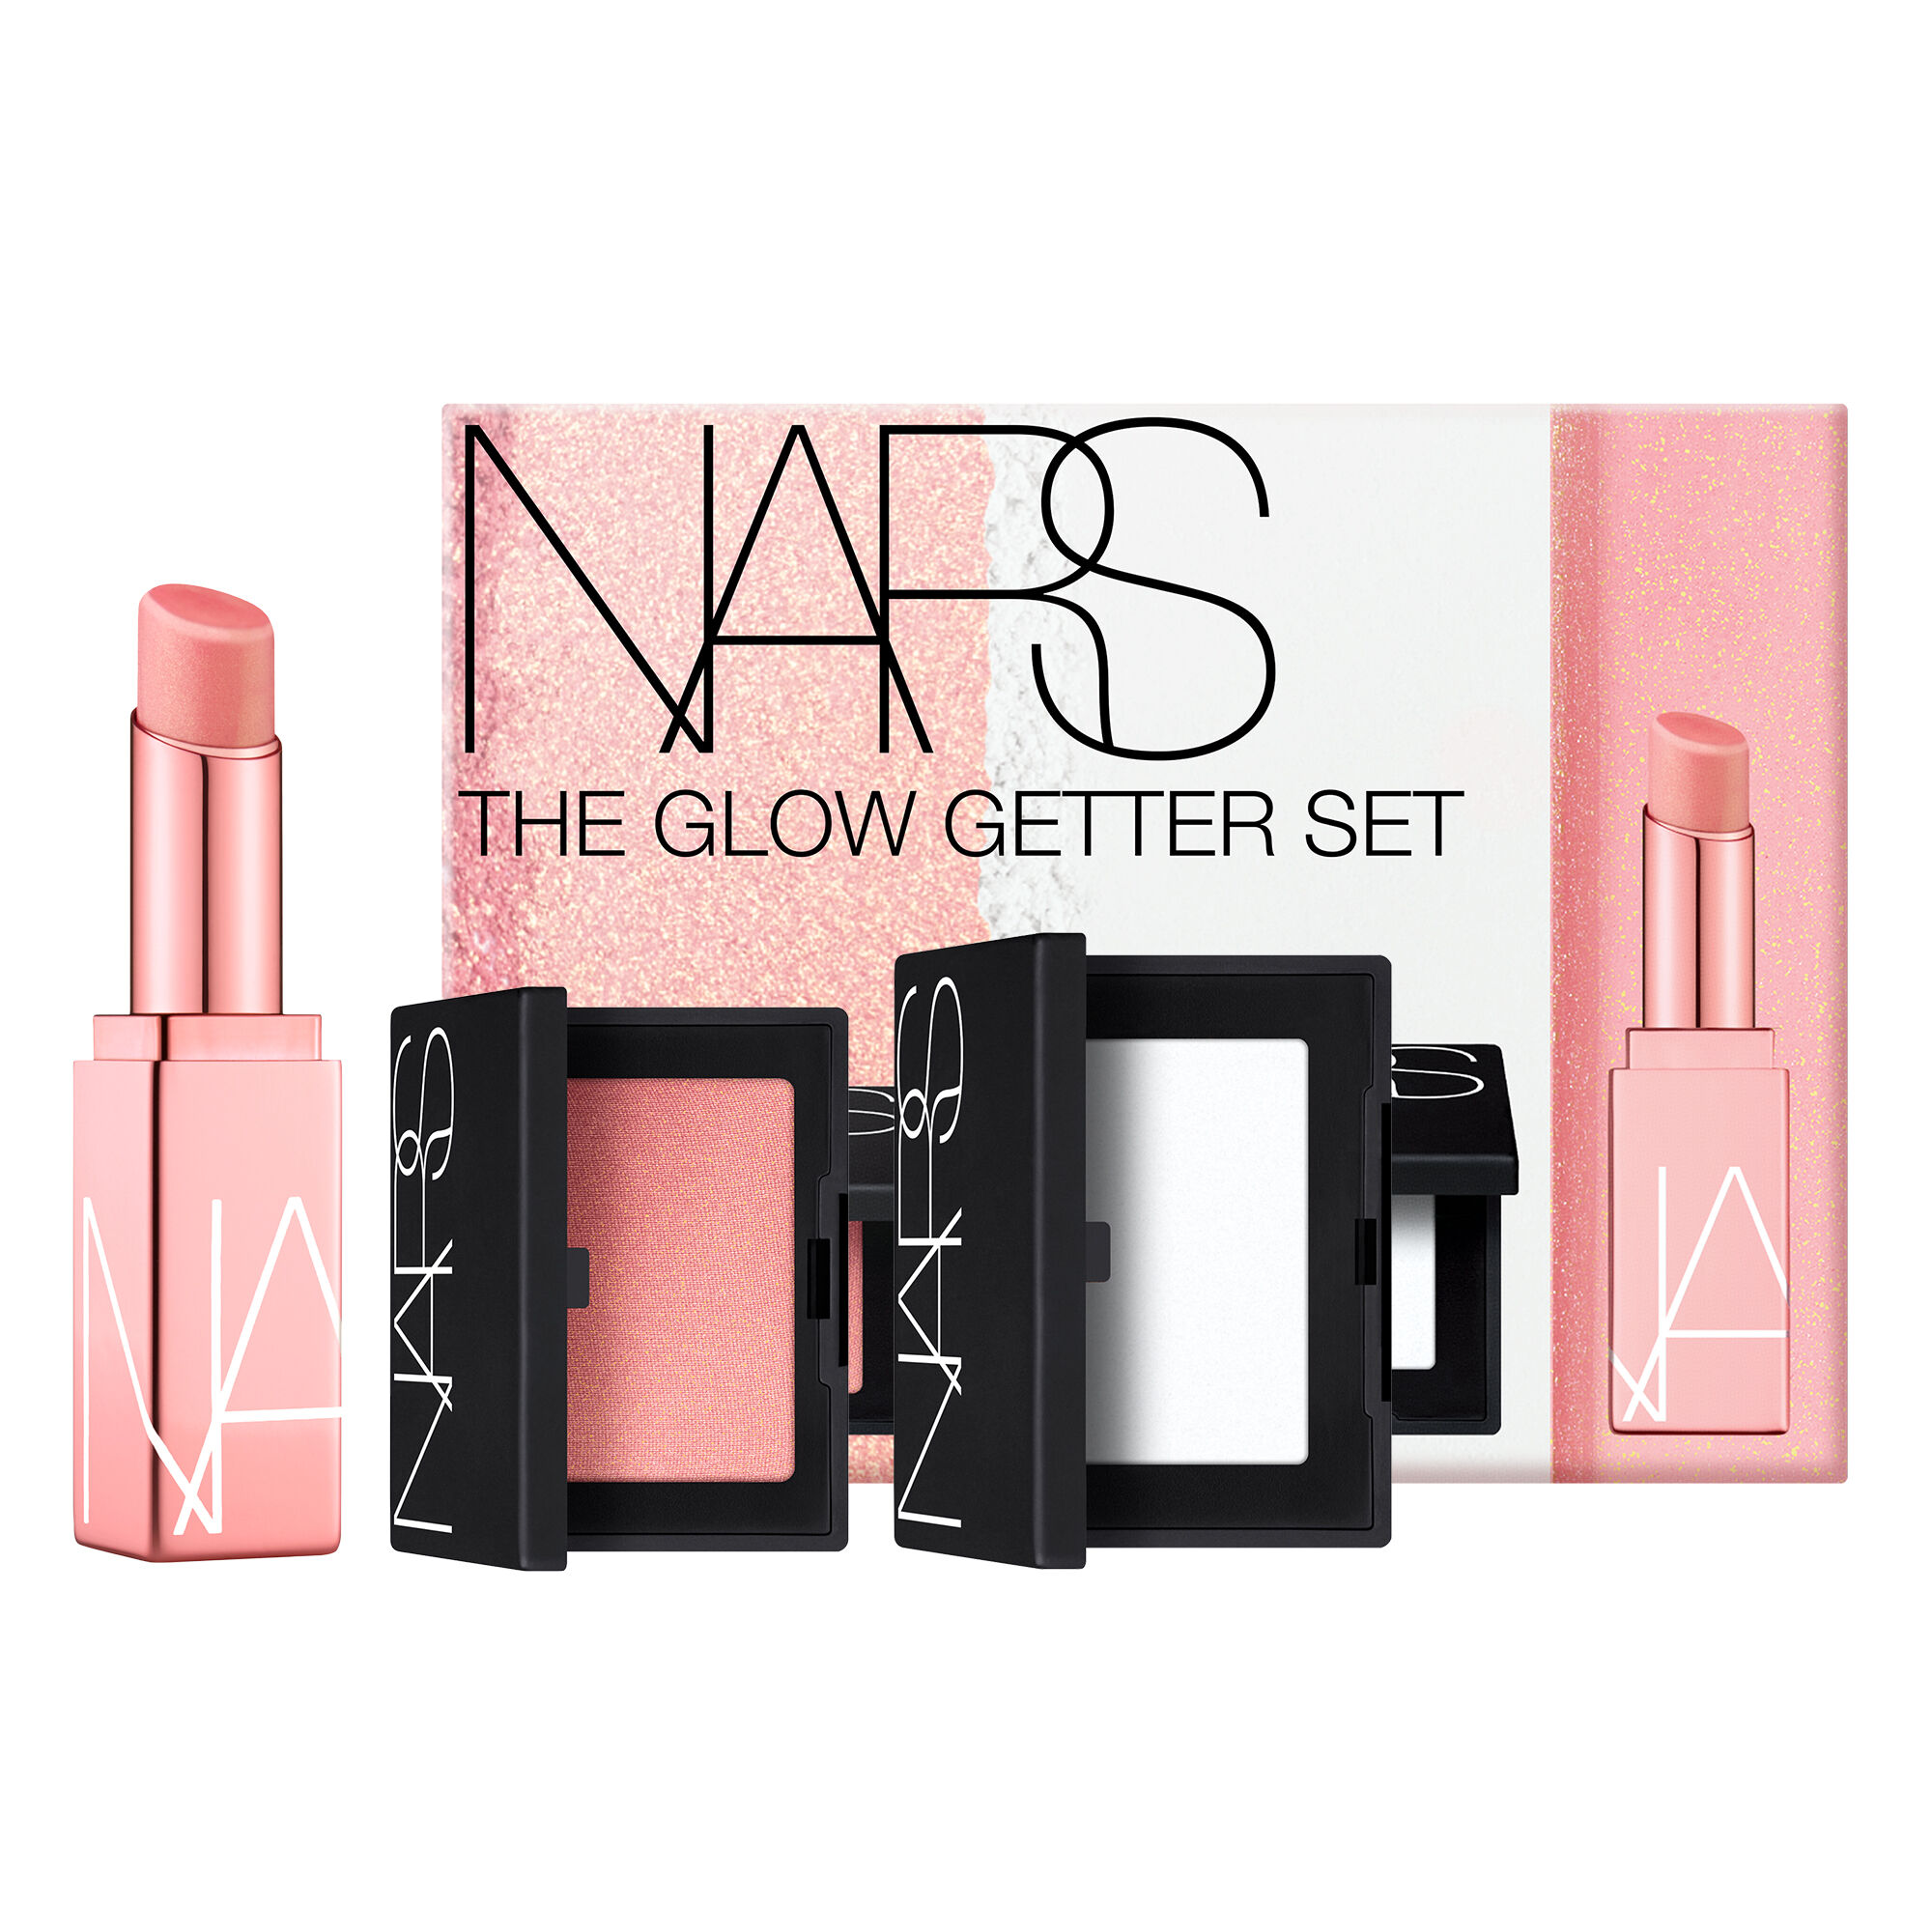 Just Arrived: New NARS Makeup Products | NARS Cosmetics